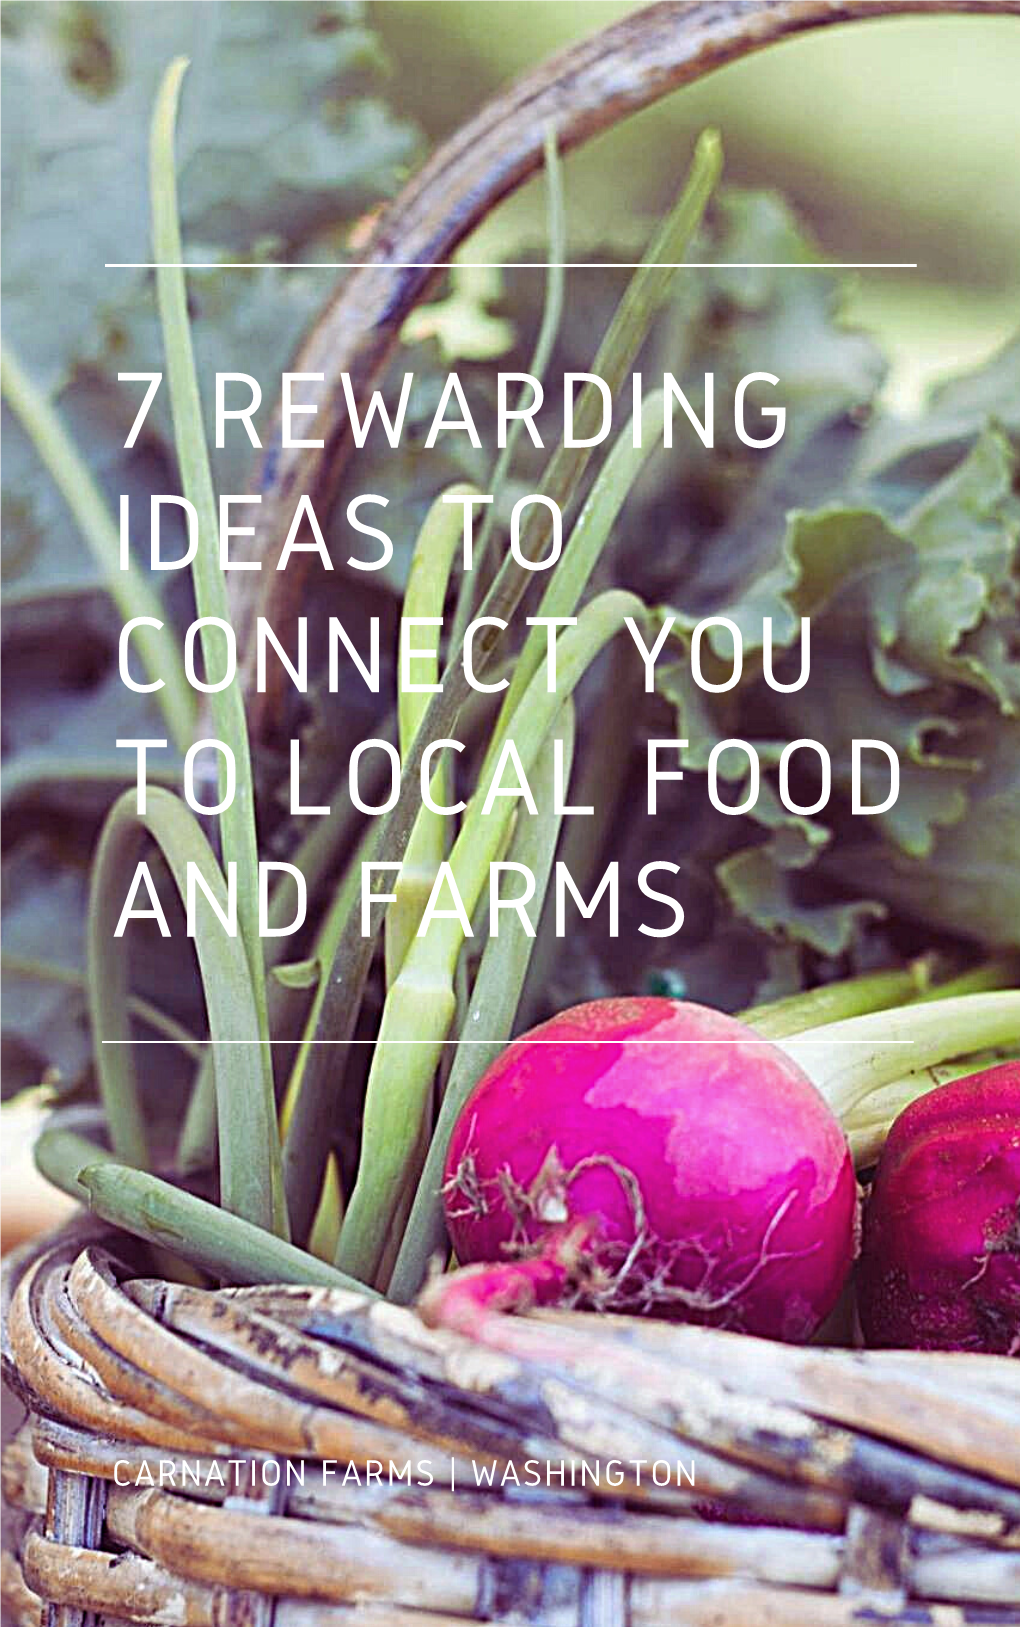 7 Rewarding Ideas to Connect You to Local Food and Farms